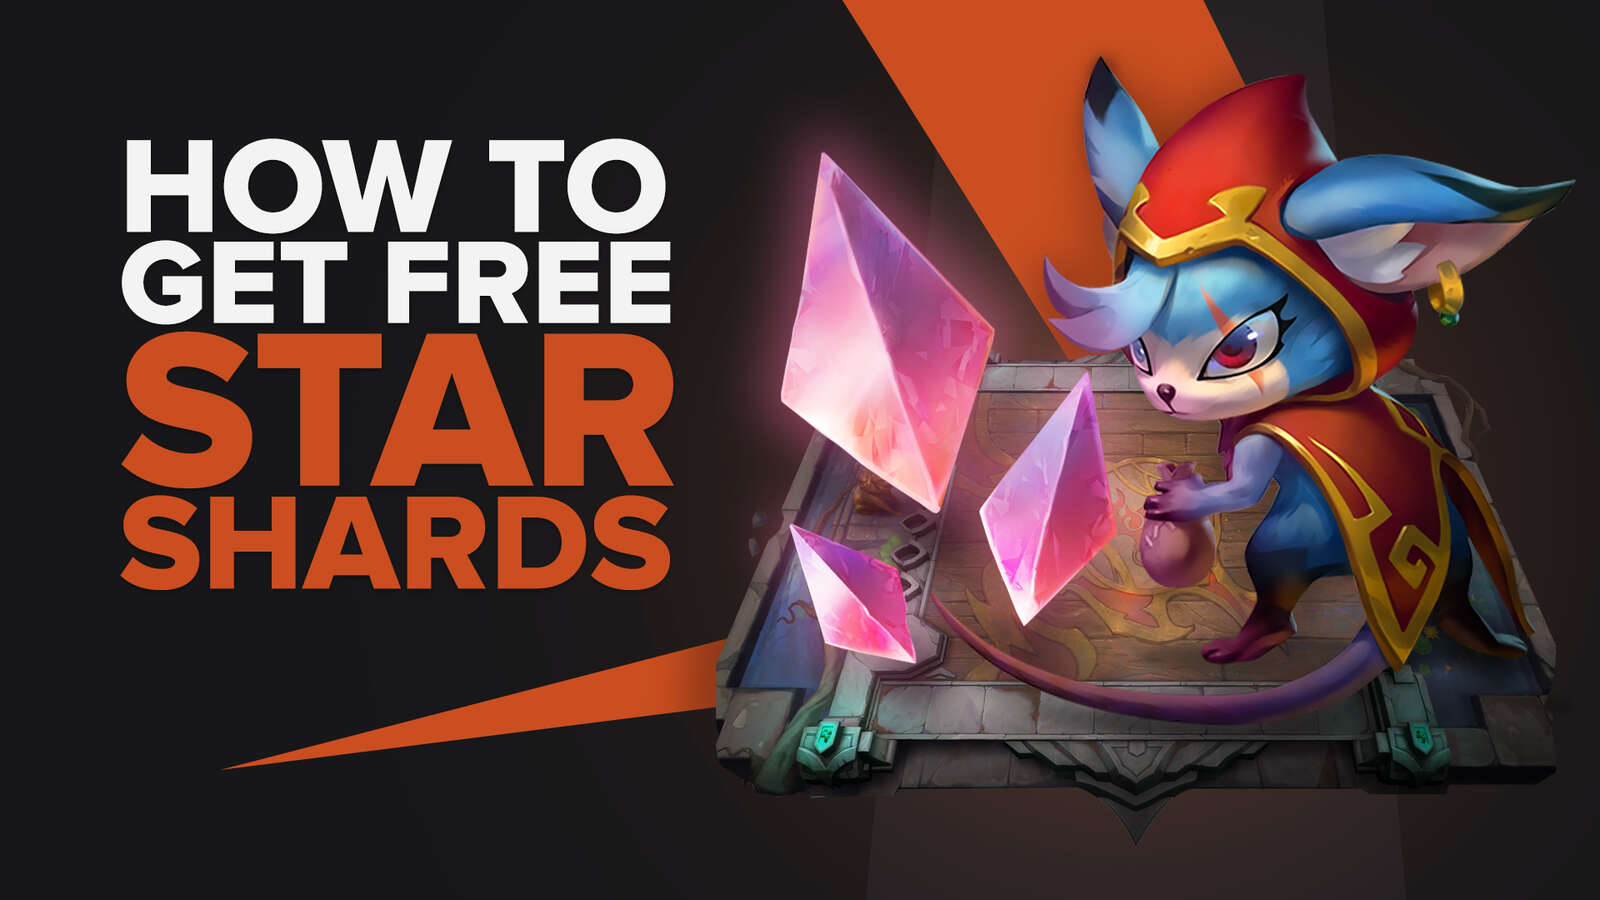 How To Get Free Star Shards in TFT League Of Legends